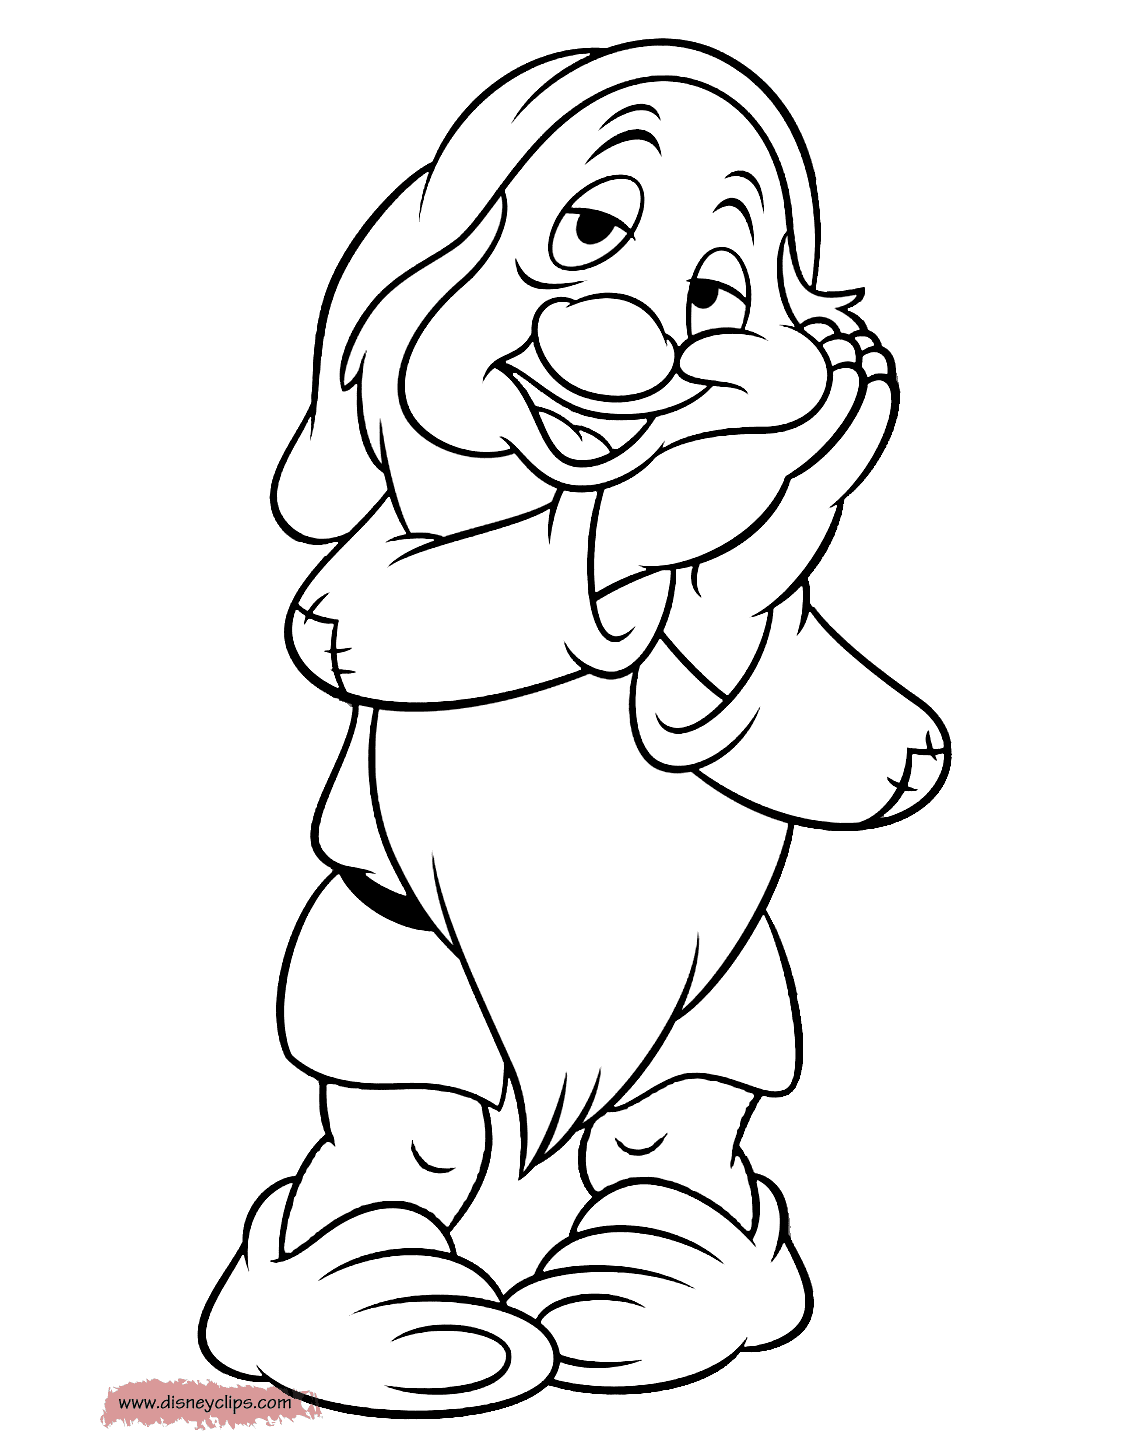 Snow white and the seven dwarfs coloring pages printable for free download